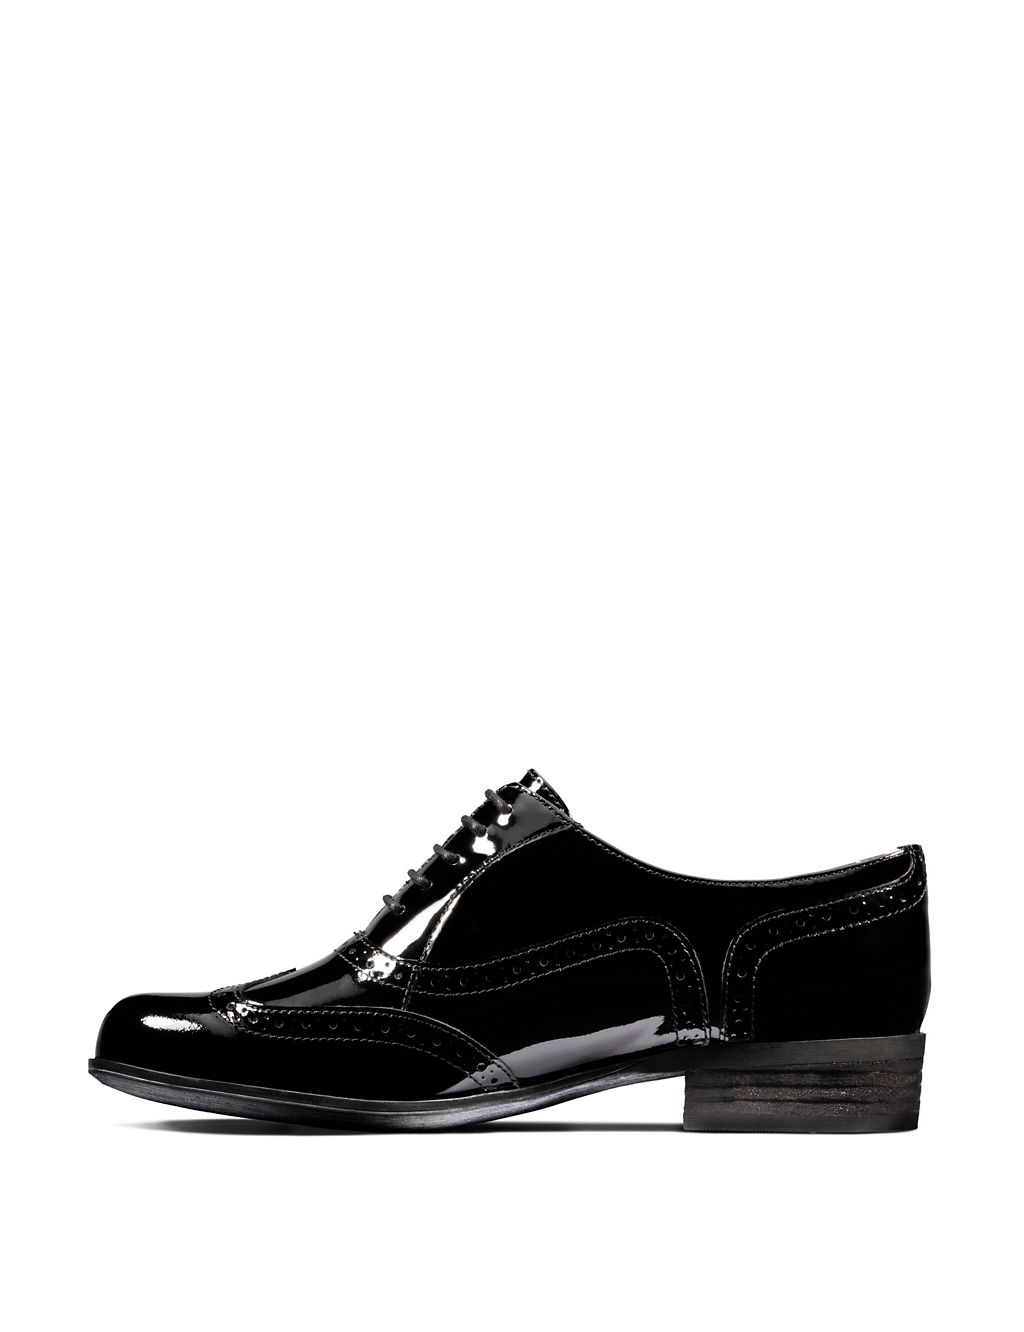 Wide Fit Leather Patent Brogues 7 of 7